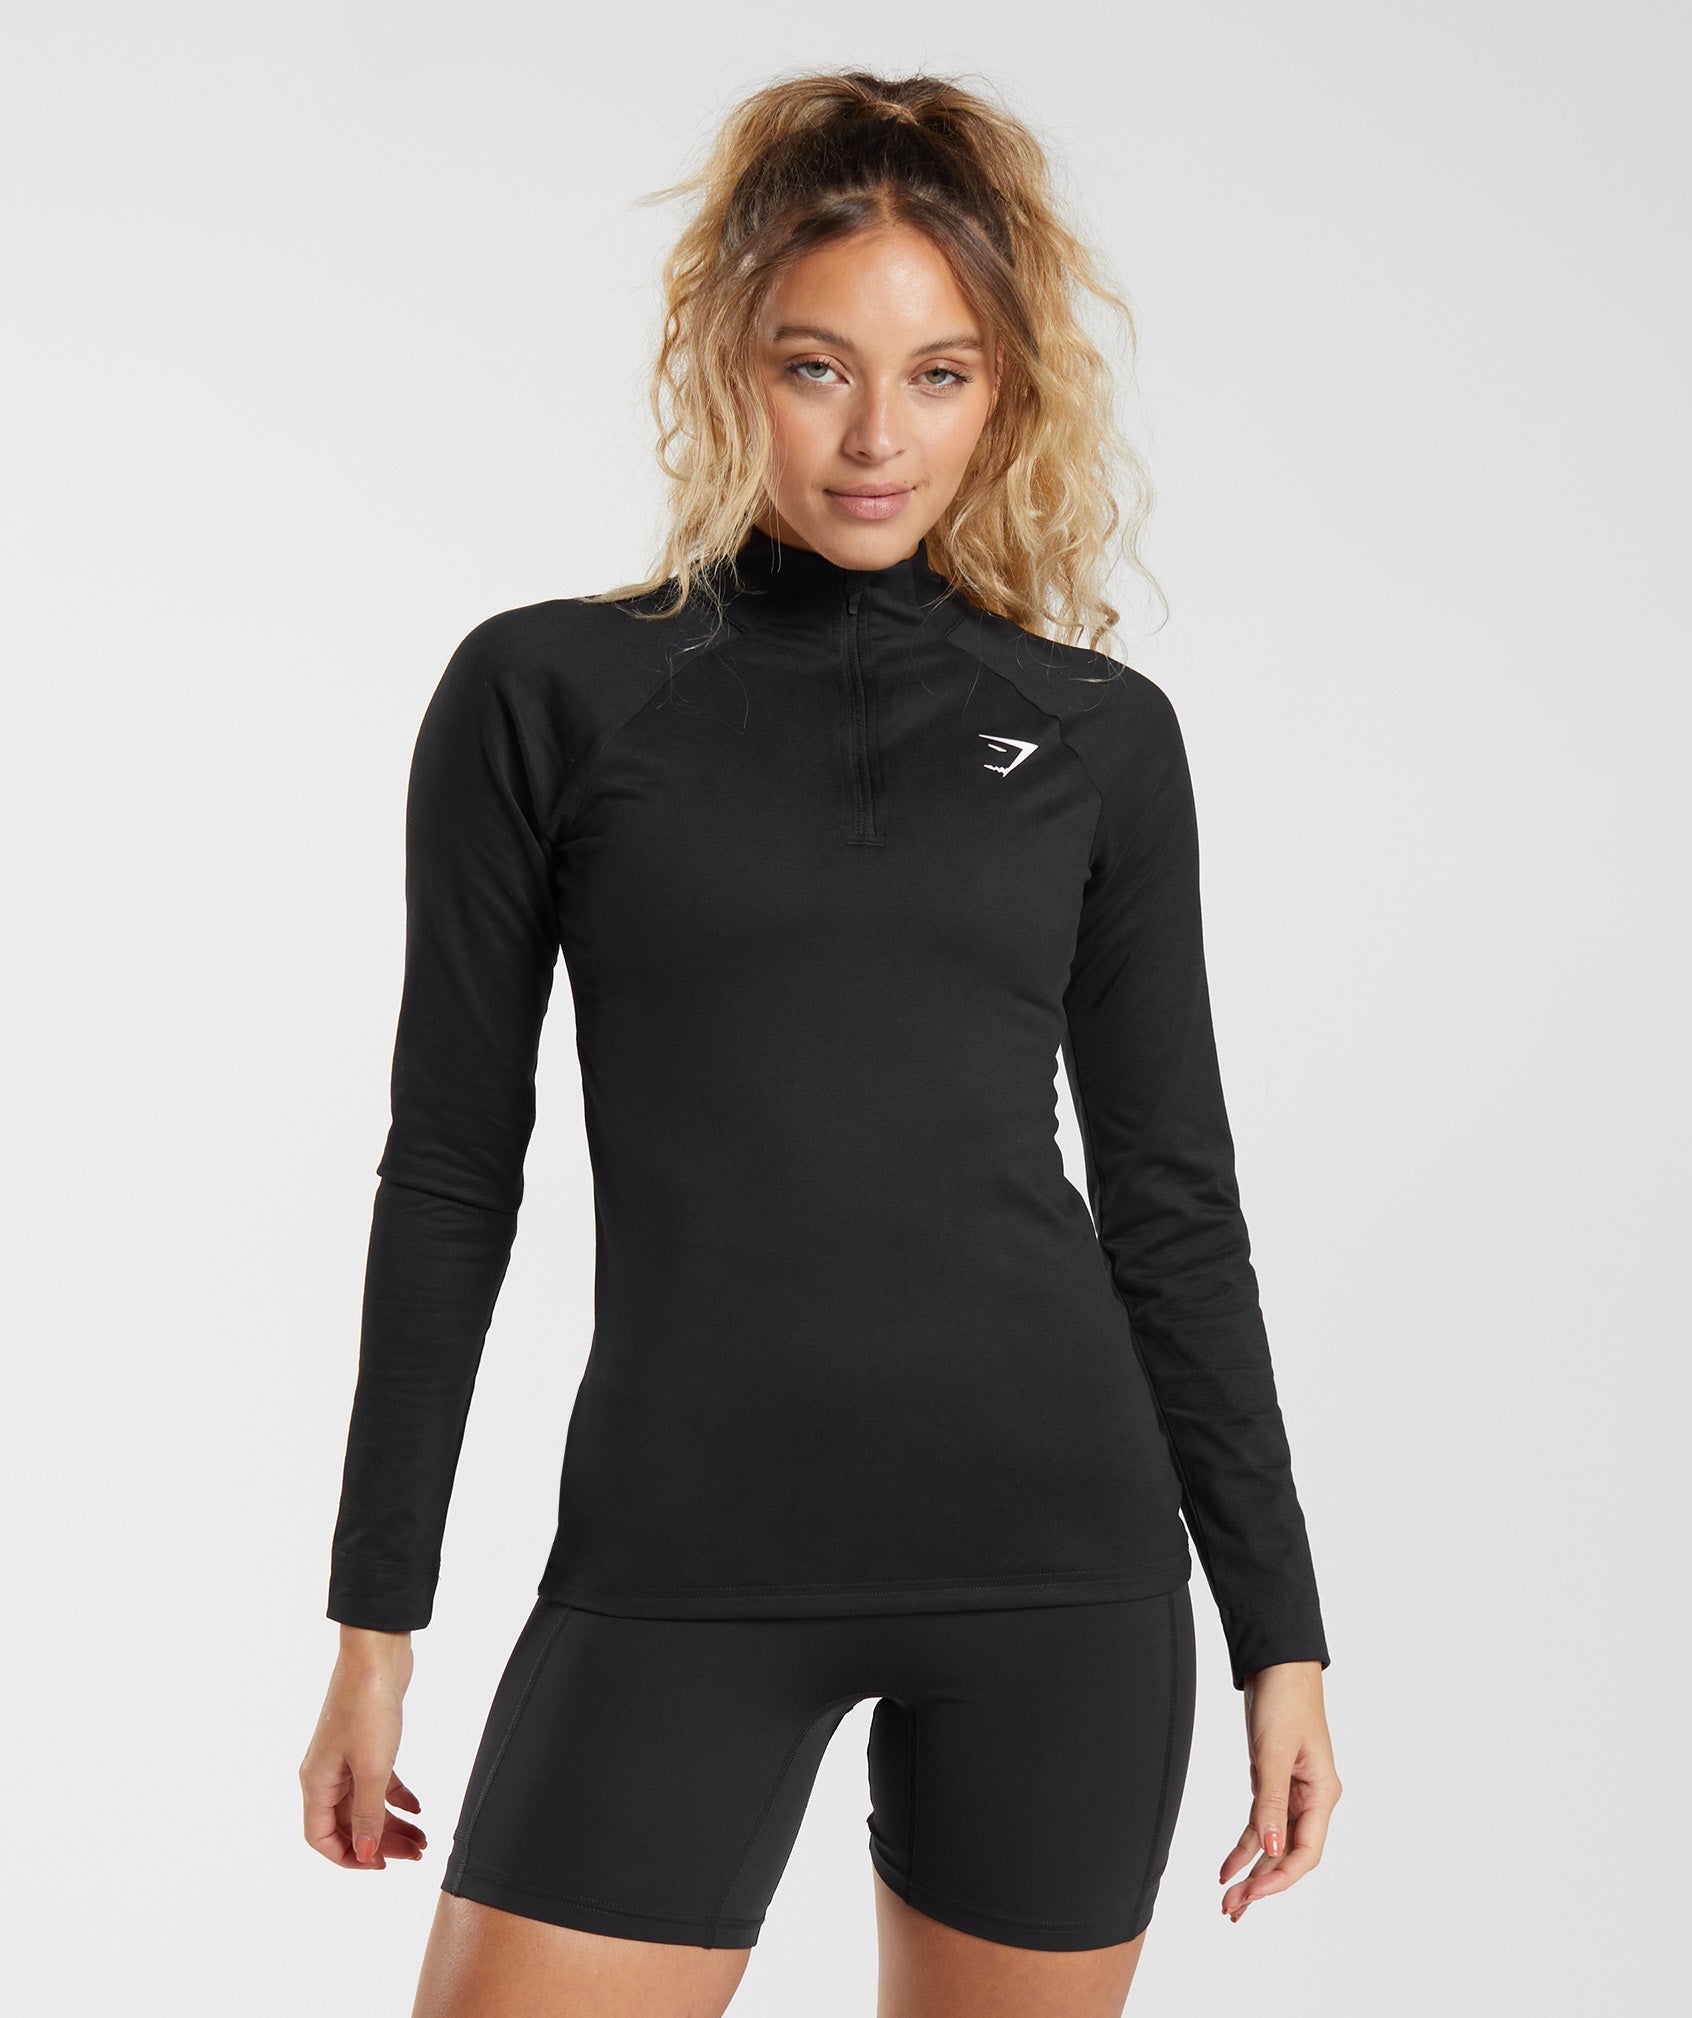 GYMSHARK - NEW Women's Black Training Zip Up Top - Size Small :  r/gym_apparel_for_women